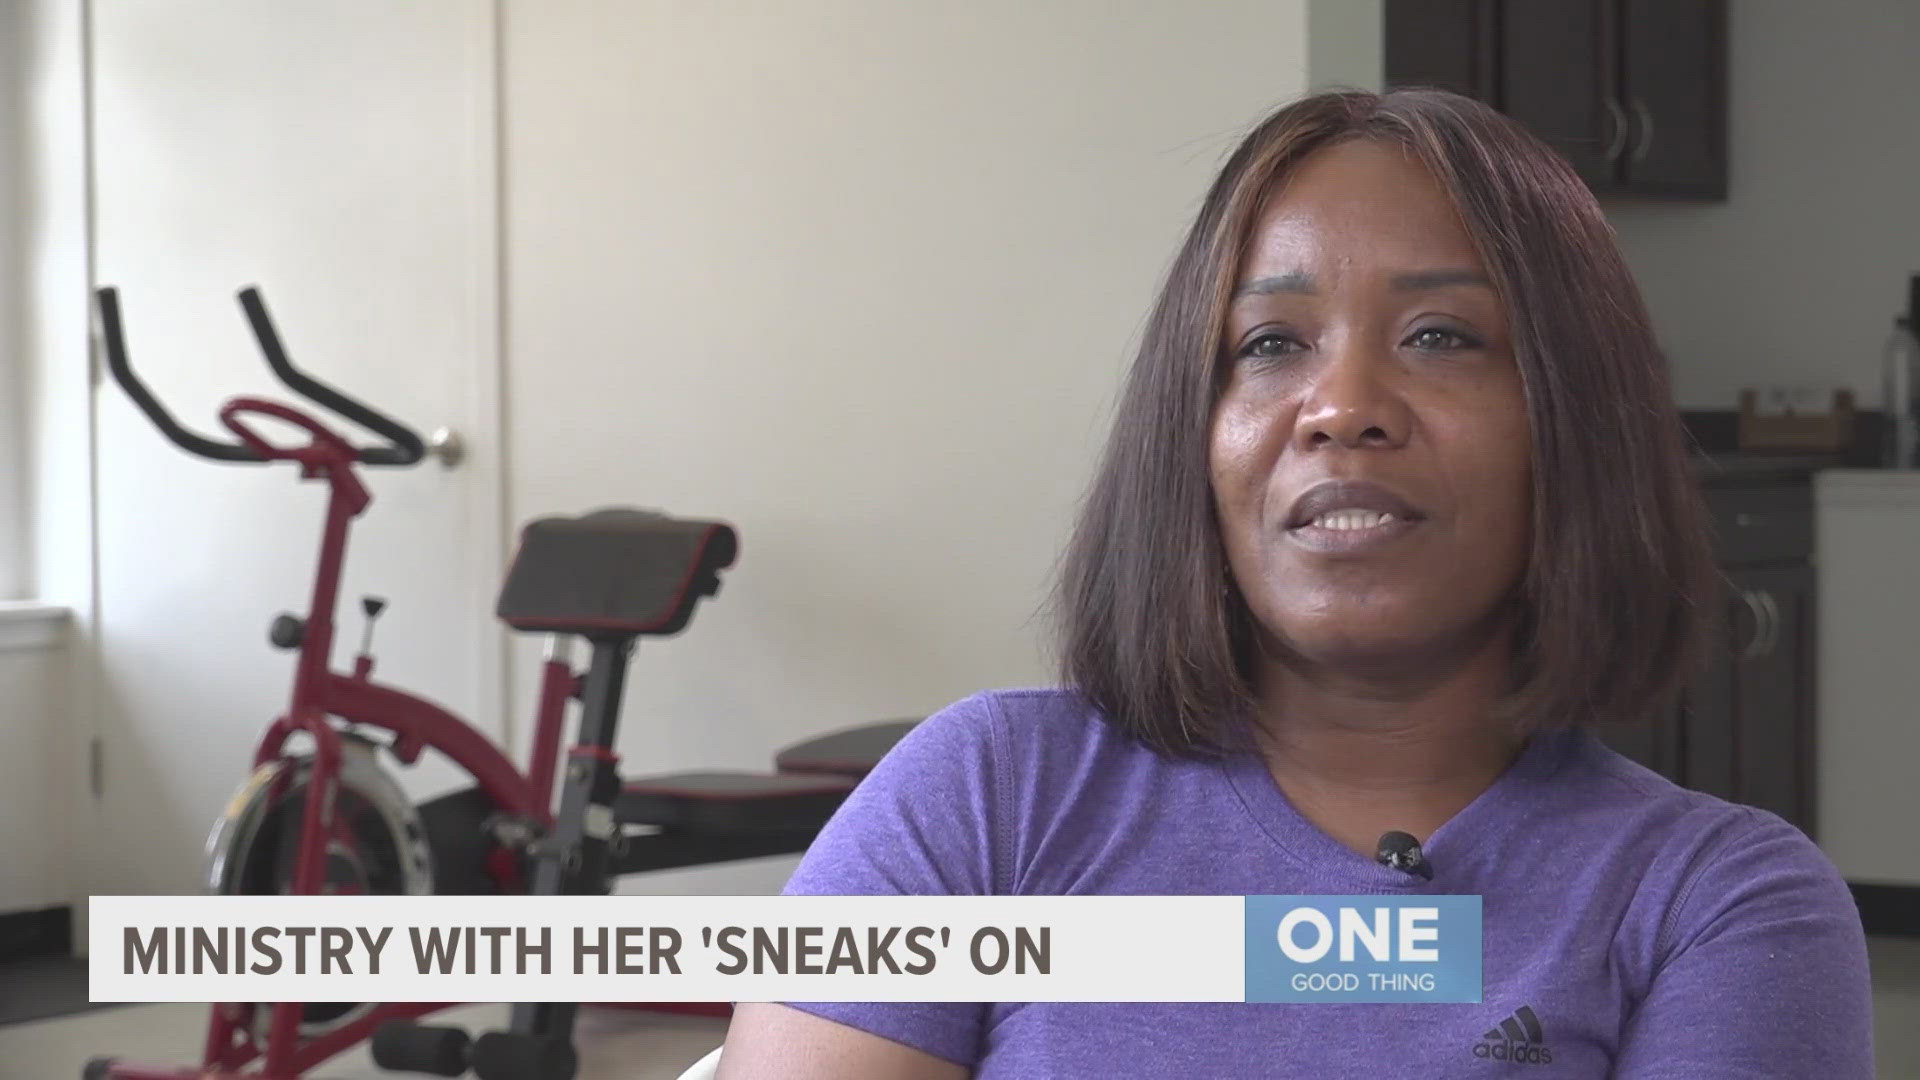 For the past 20 years, Odessa Yonkers has been on a mission to promote fitness in her community. In more ways than one, her dad was the inspiration for that mission.